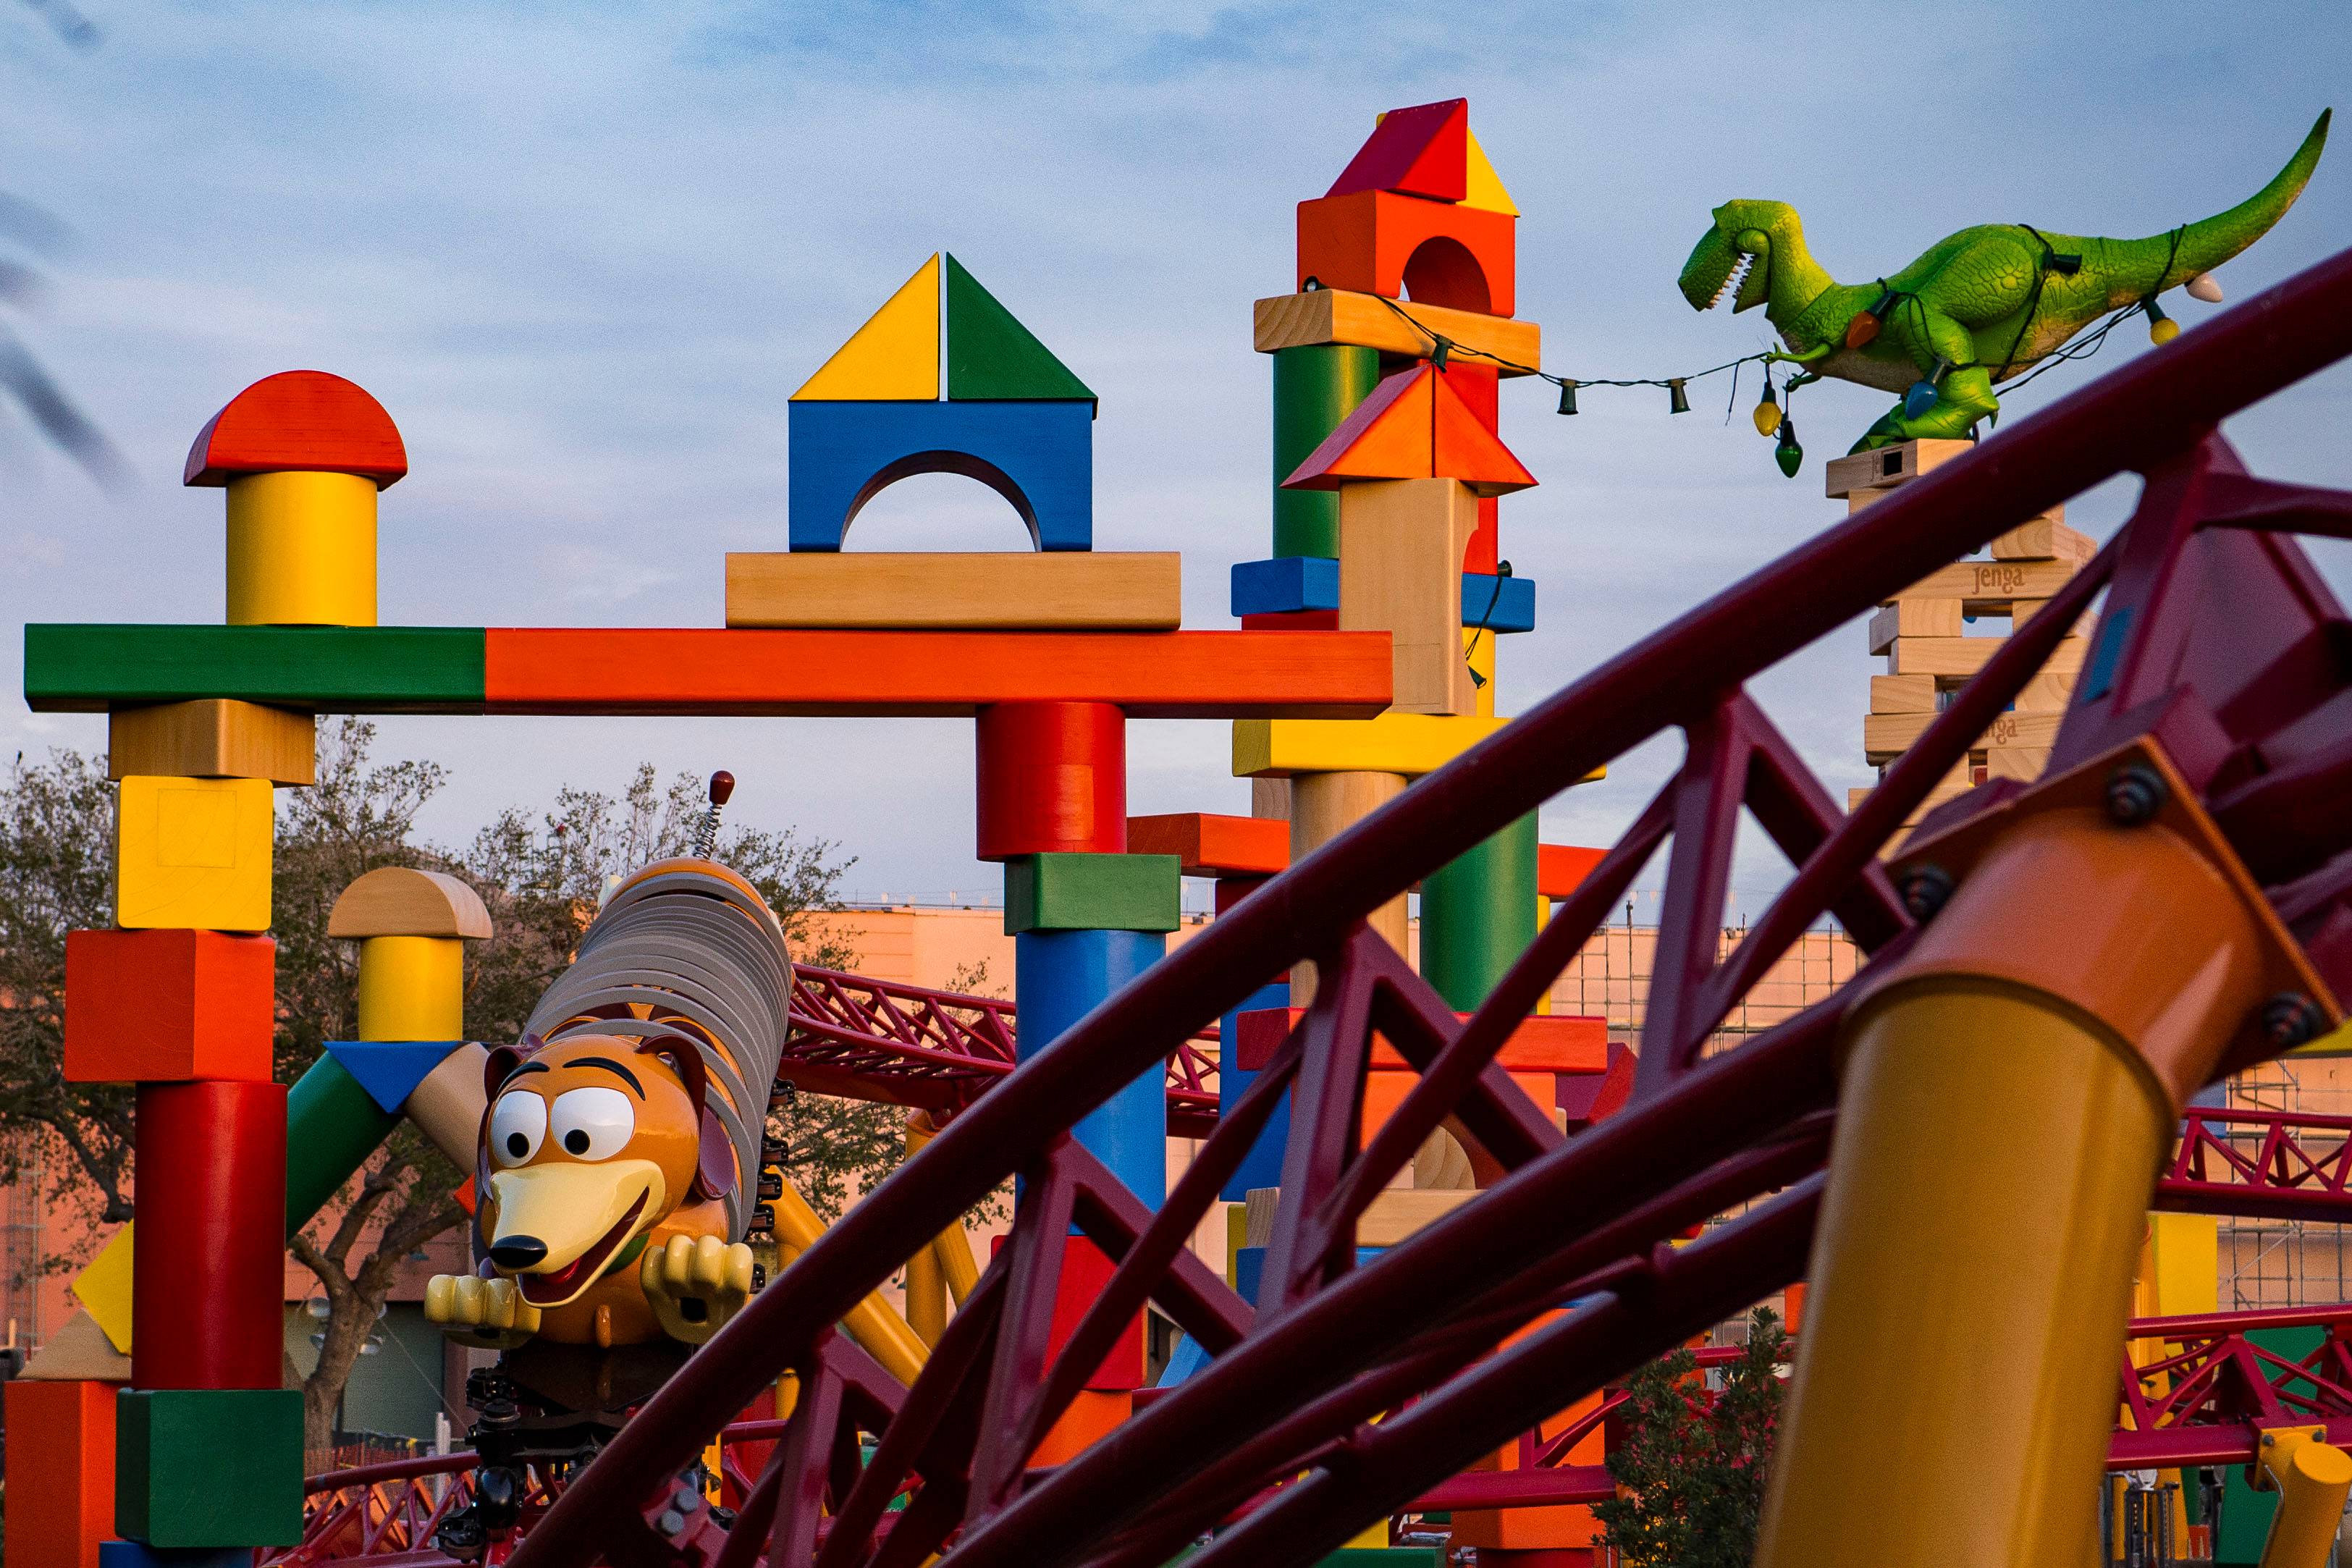 Ride duration timings for Slinky Dog Dash and Alien Swirling Saucers